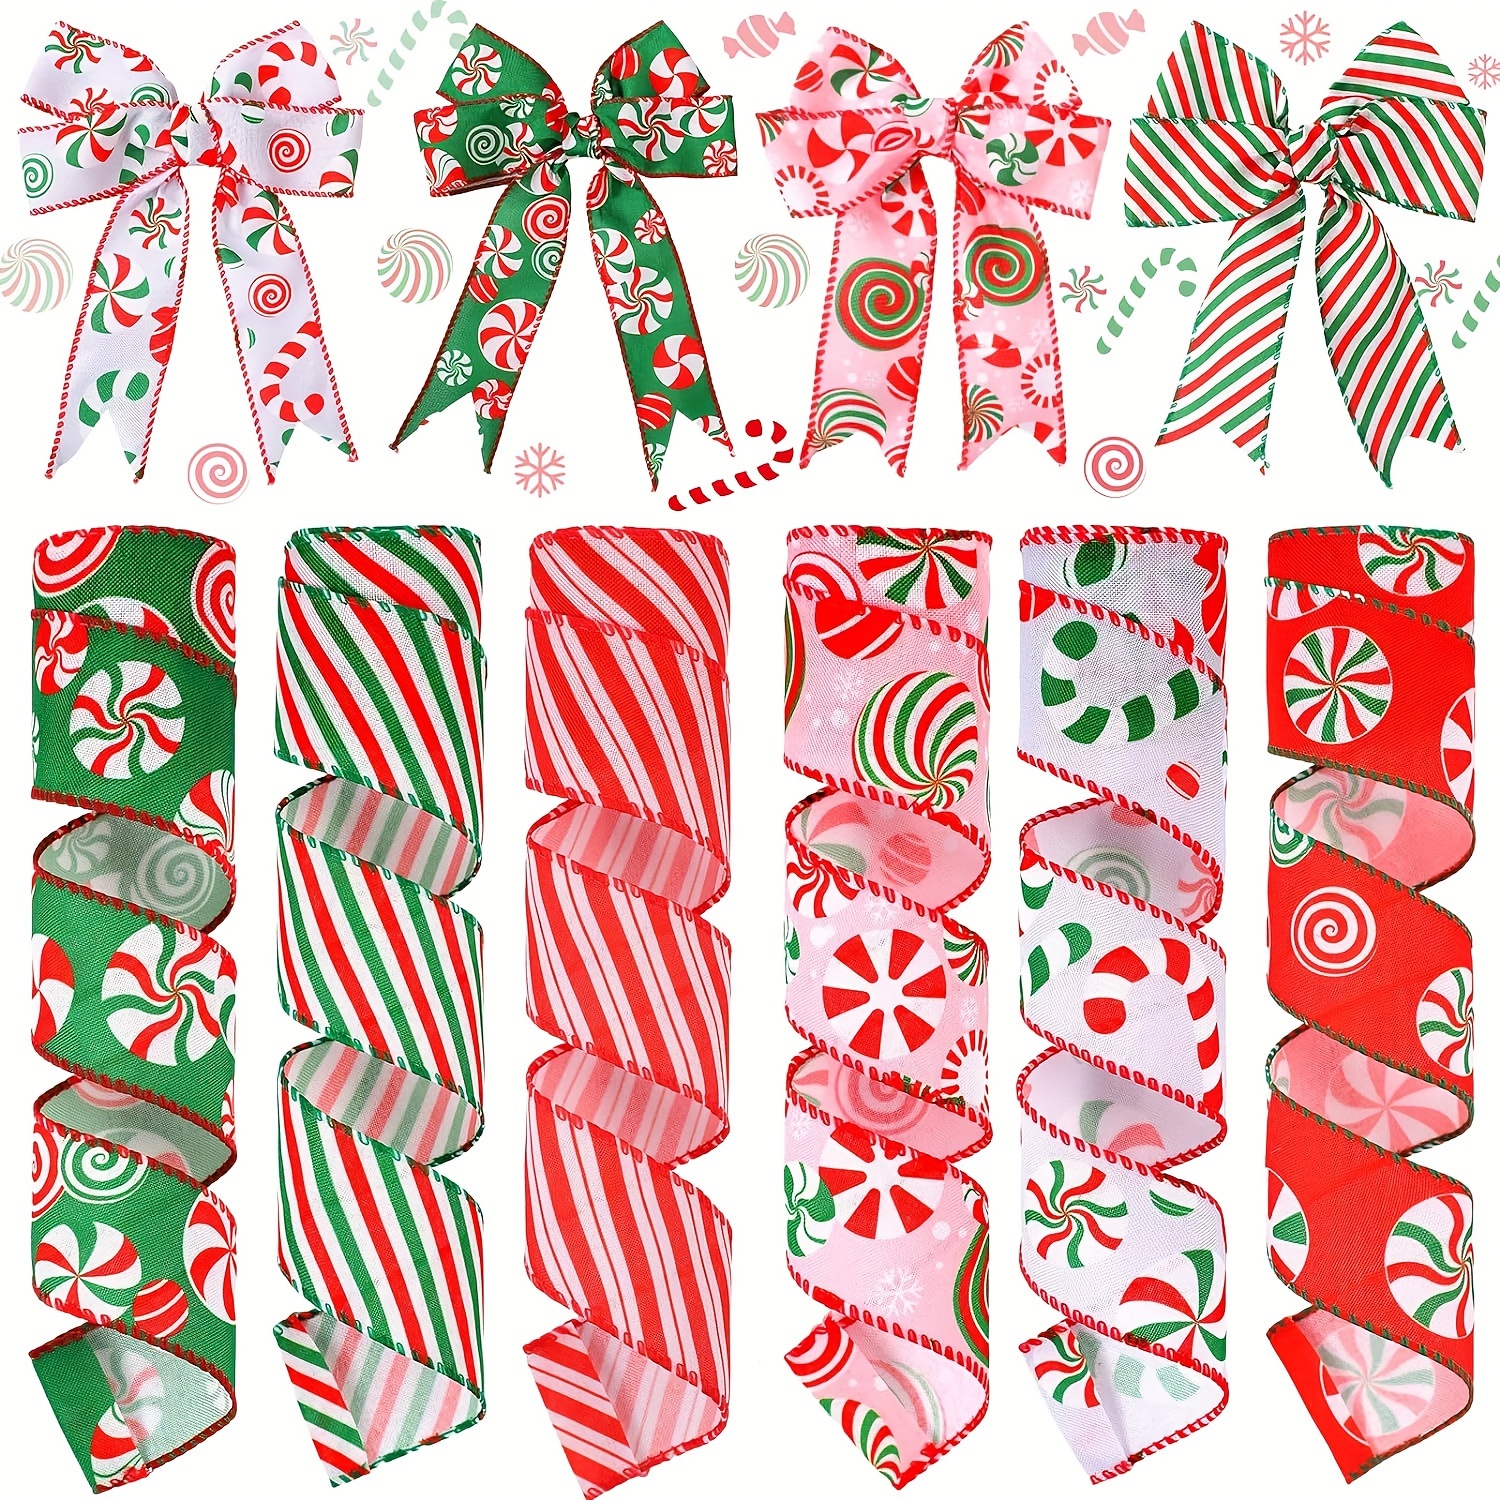  Christmas Ribbon for Gift Wrapping Wired Edge Burlap